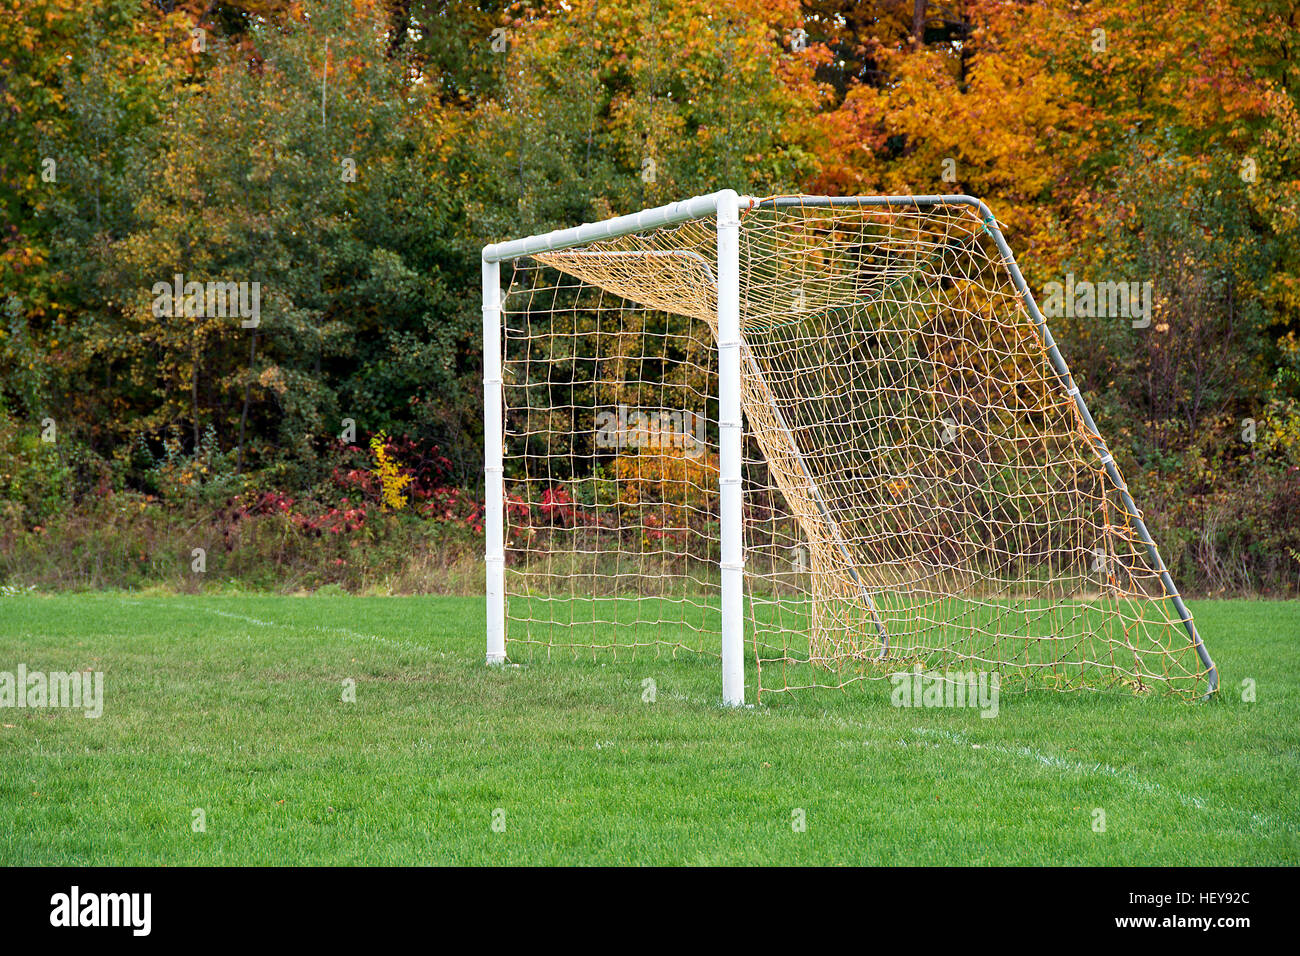 empty soccer goal net on playing field in autumn Stock Photo